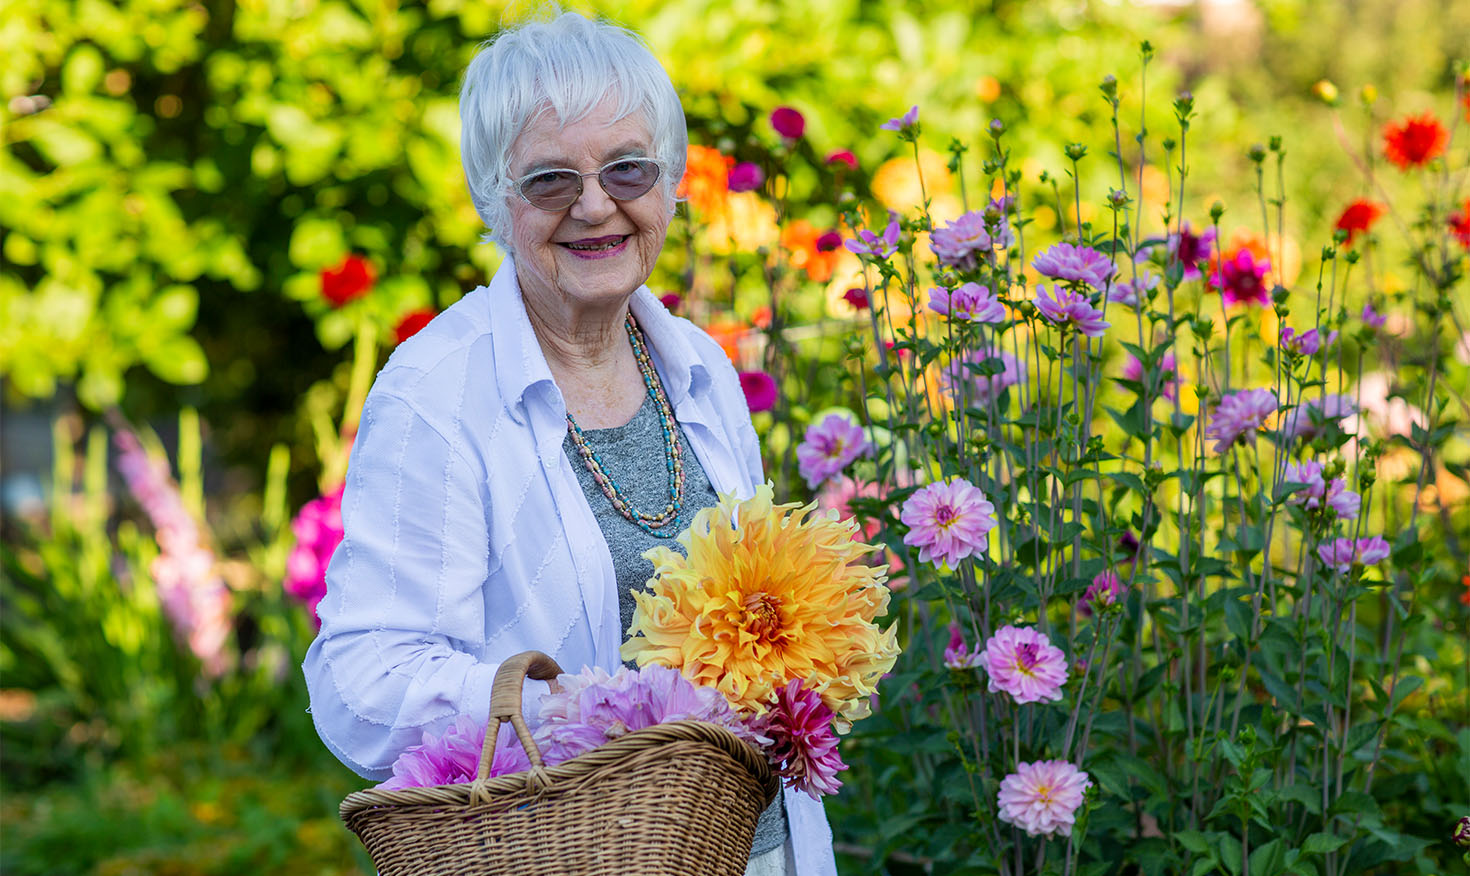 Senior woman in the garden holding a basket of fresh-cut flowers